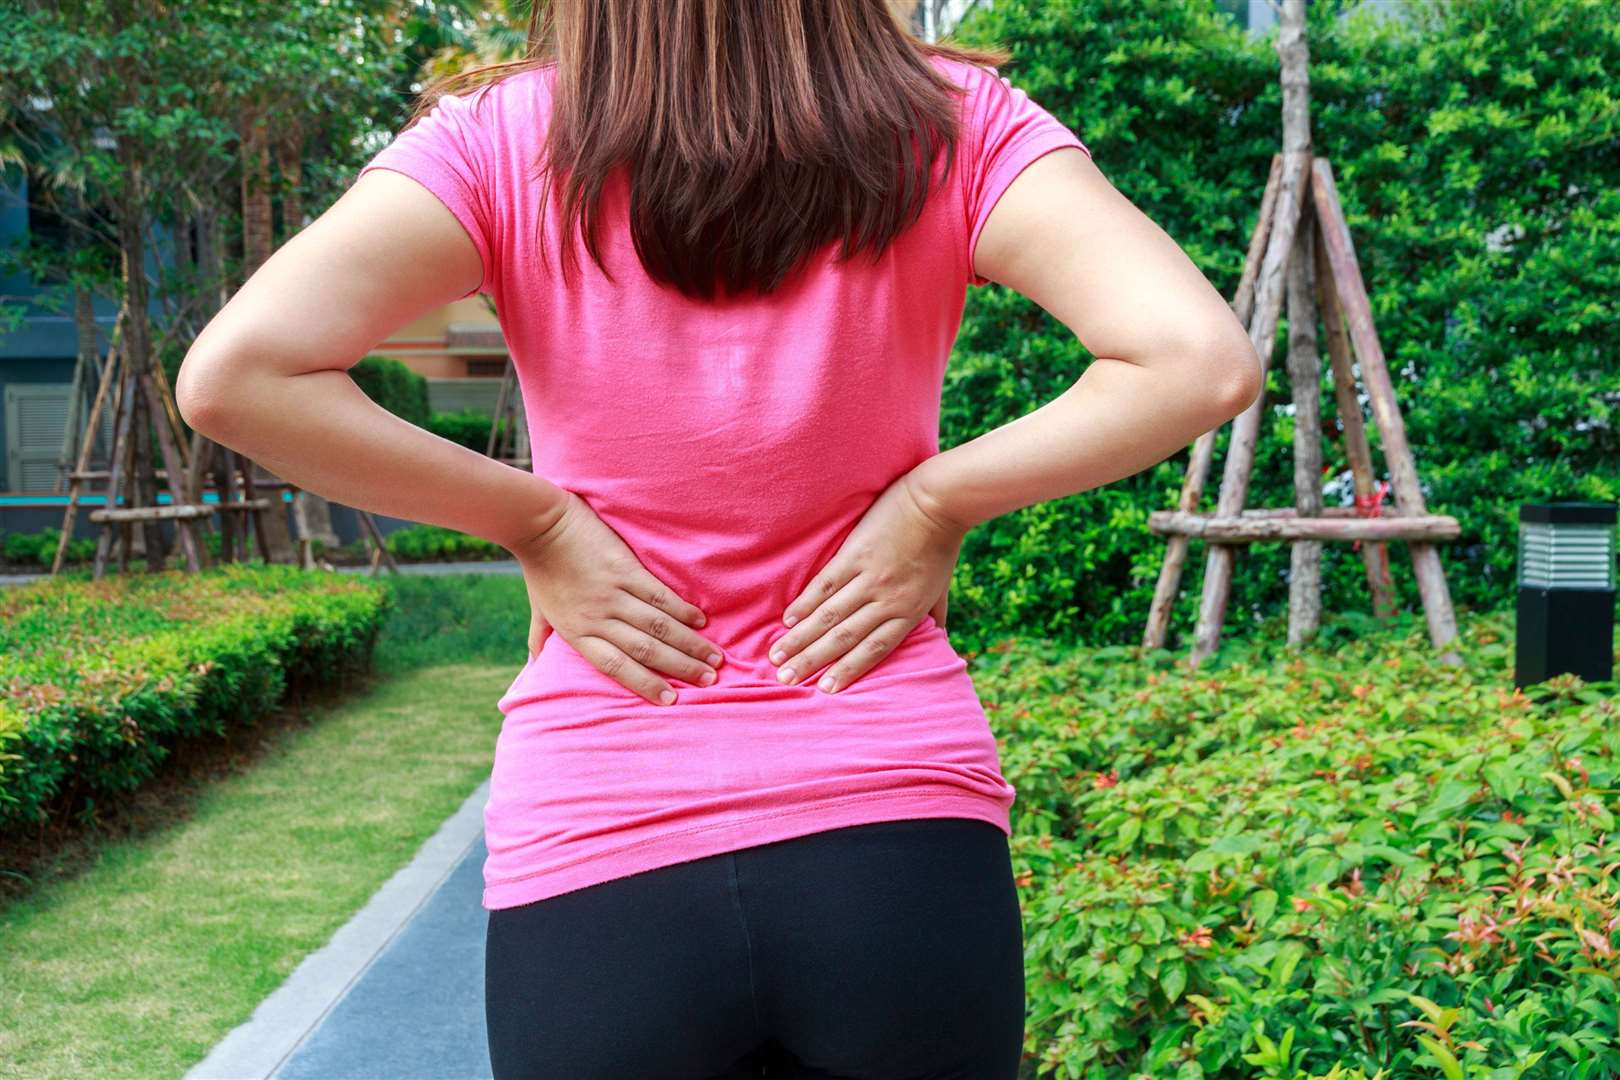 Take care not to injure your back. Picture: iStock/PA